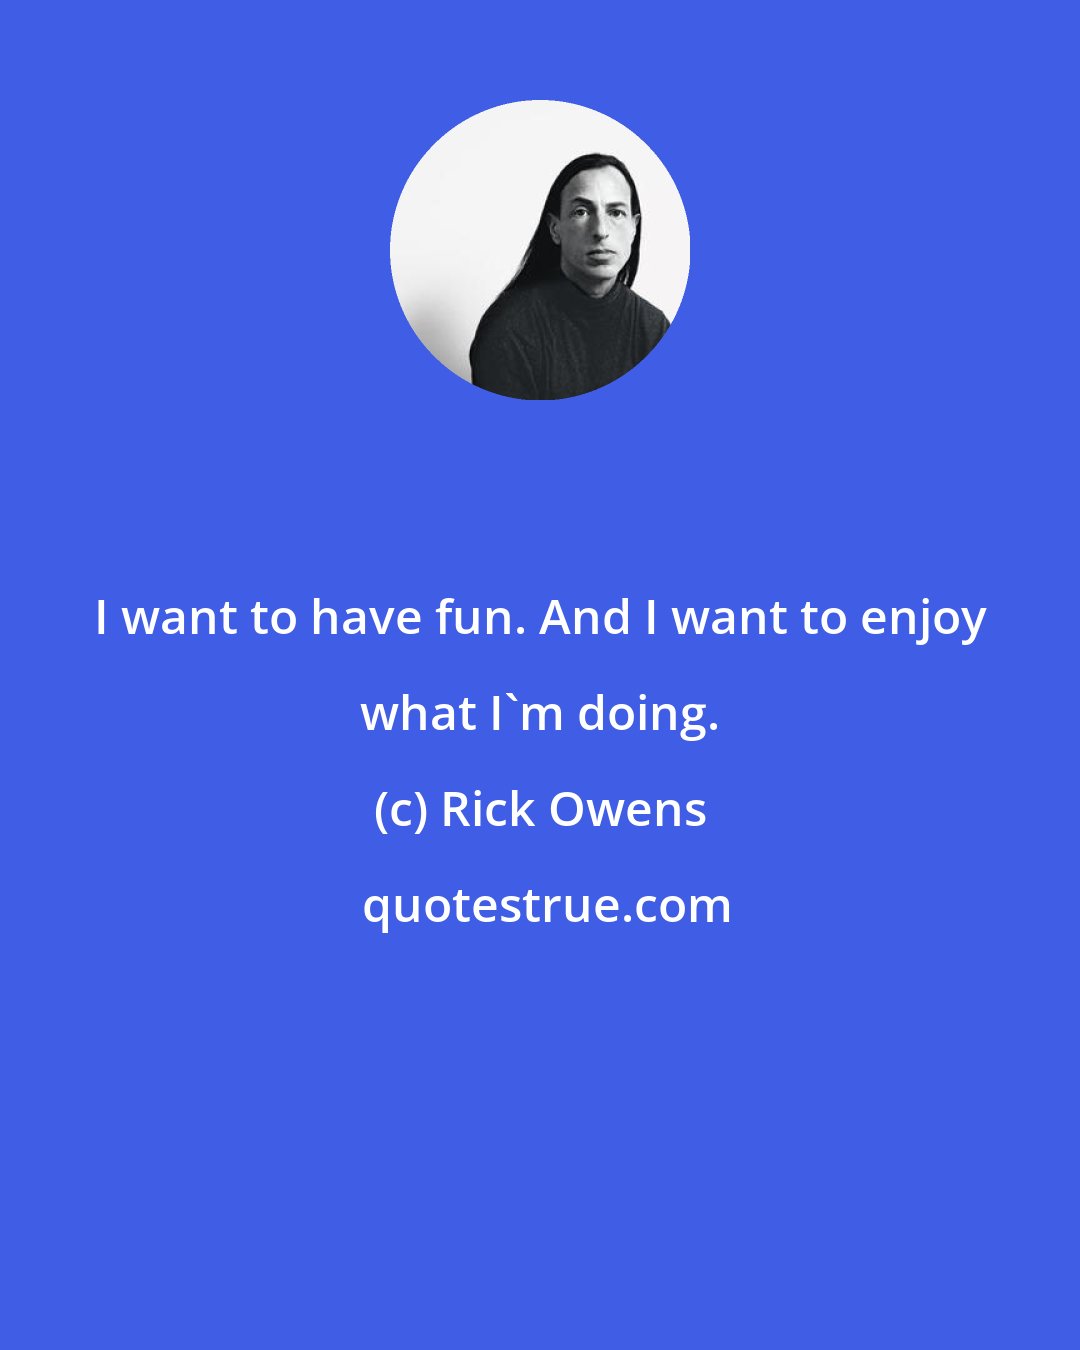 Rick Owens: I want to have fun. And I want to enjoy what I'm doing.